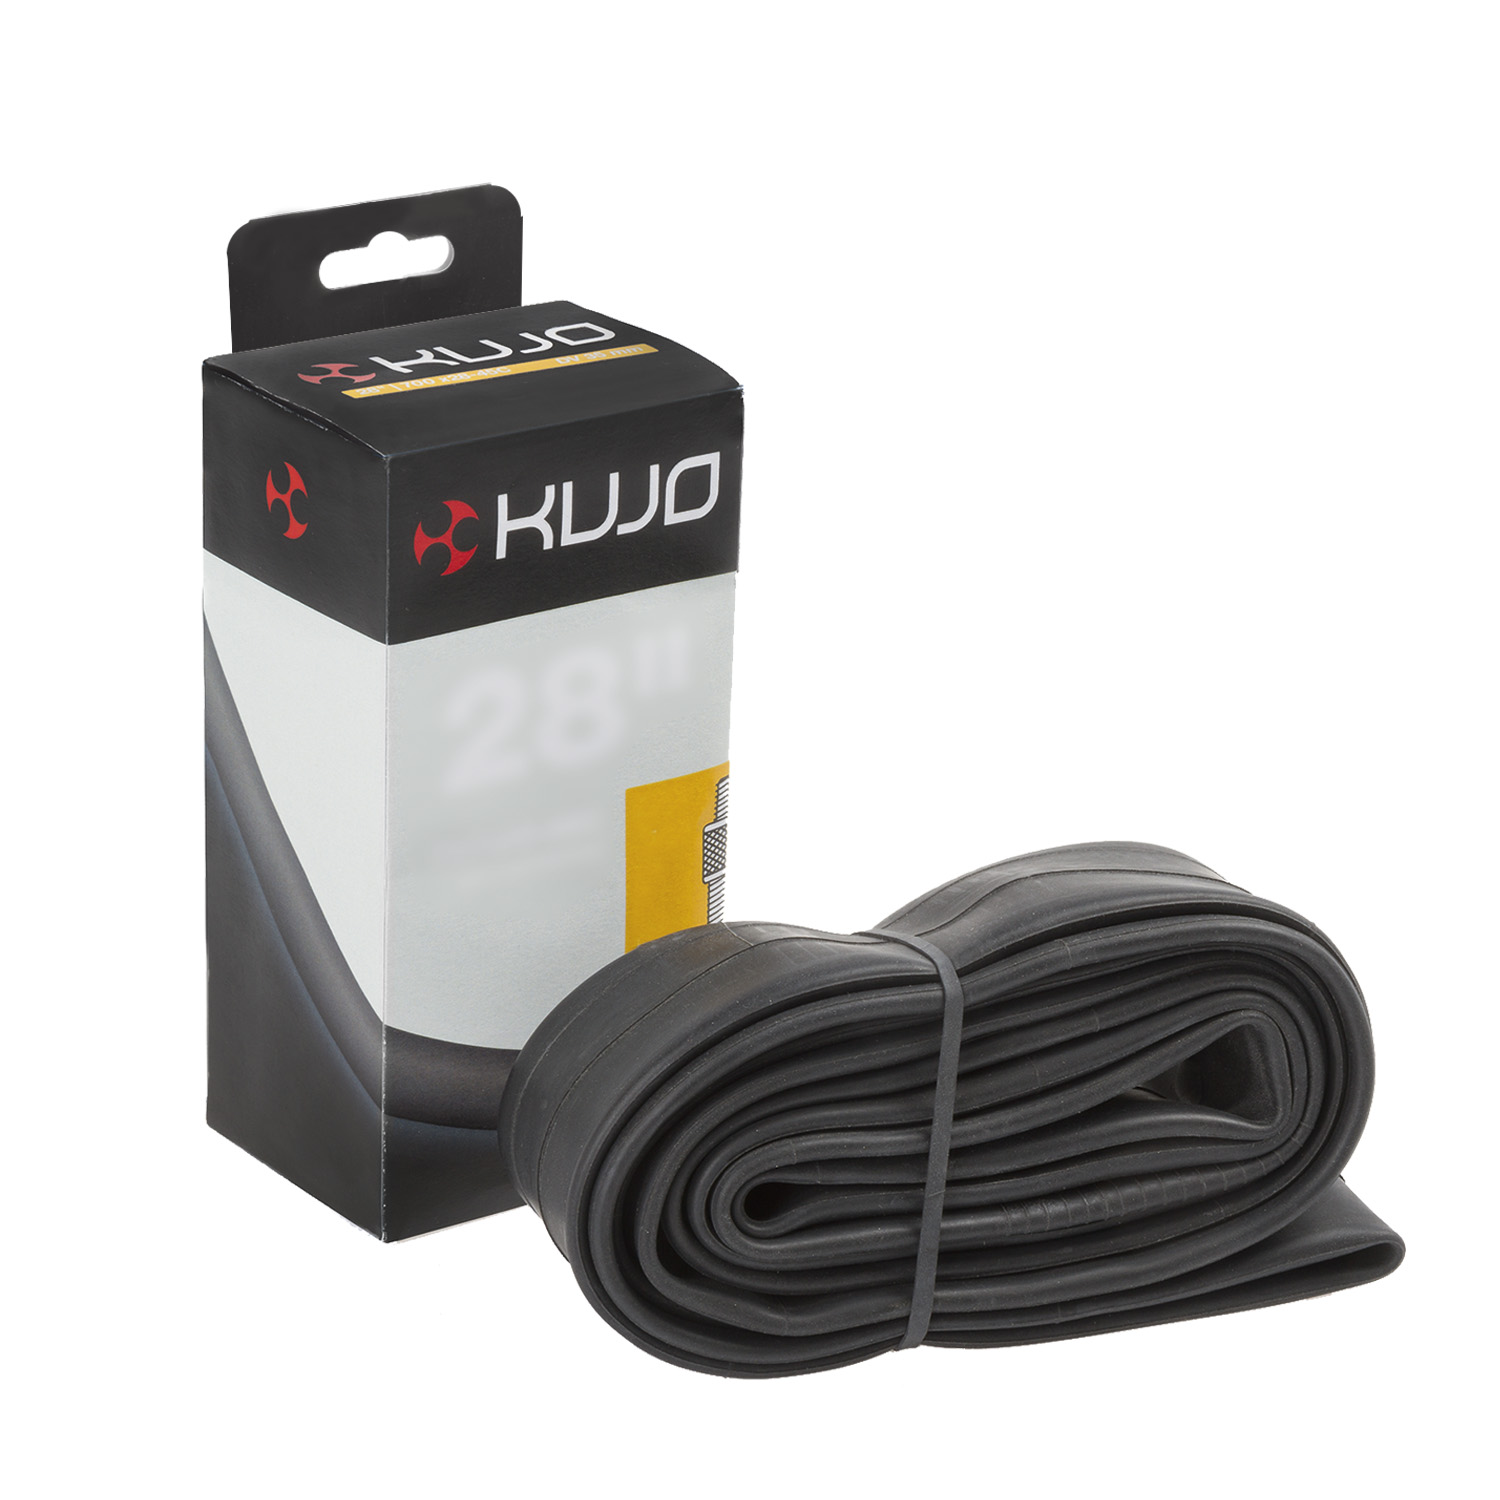 553025 KUJO 26×1.75-2.125″ bicycle tube – AVAILABLE IN SELECTED BIKE SHOPS